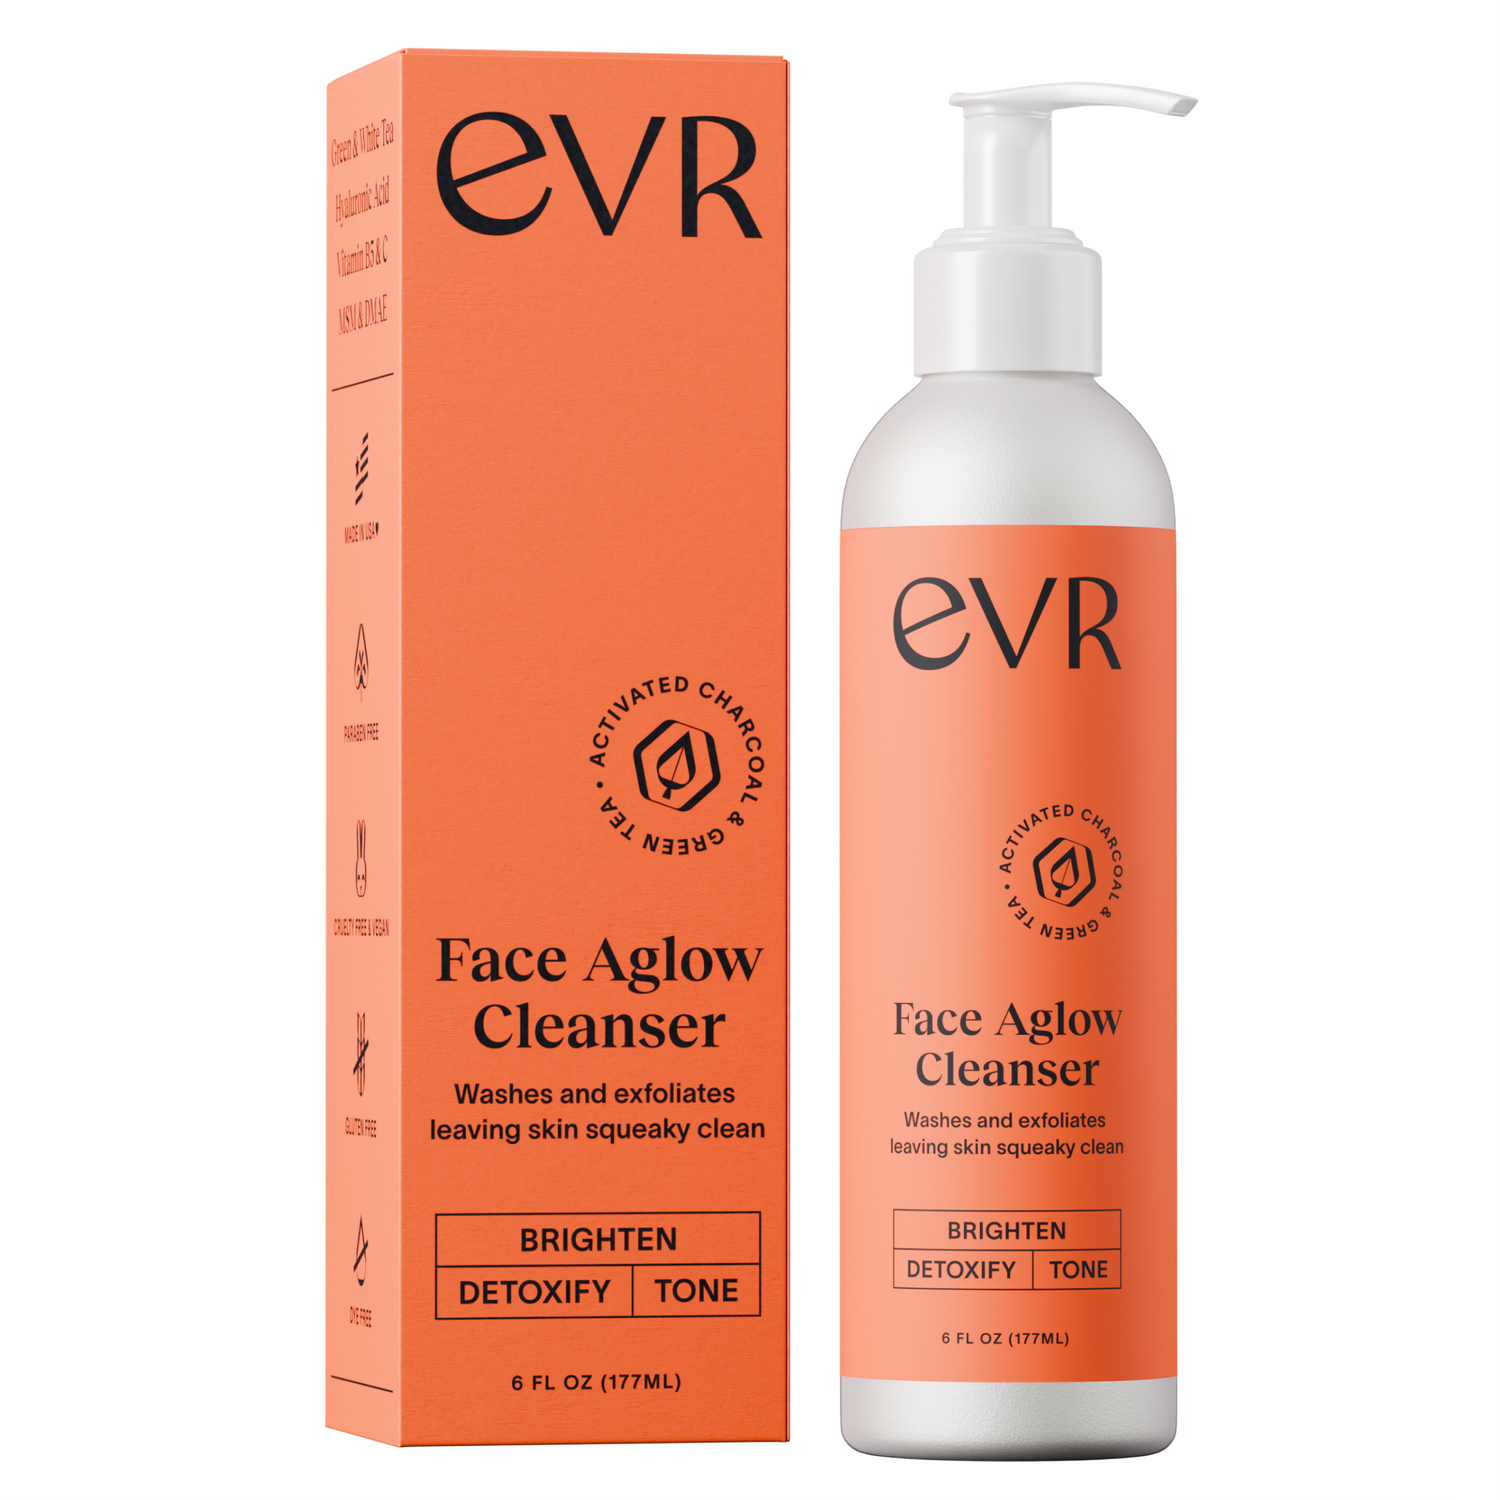 Face Aglow Cleanser